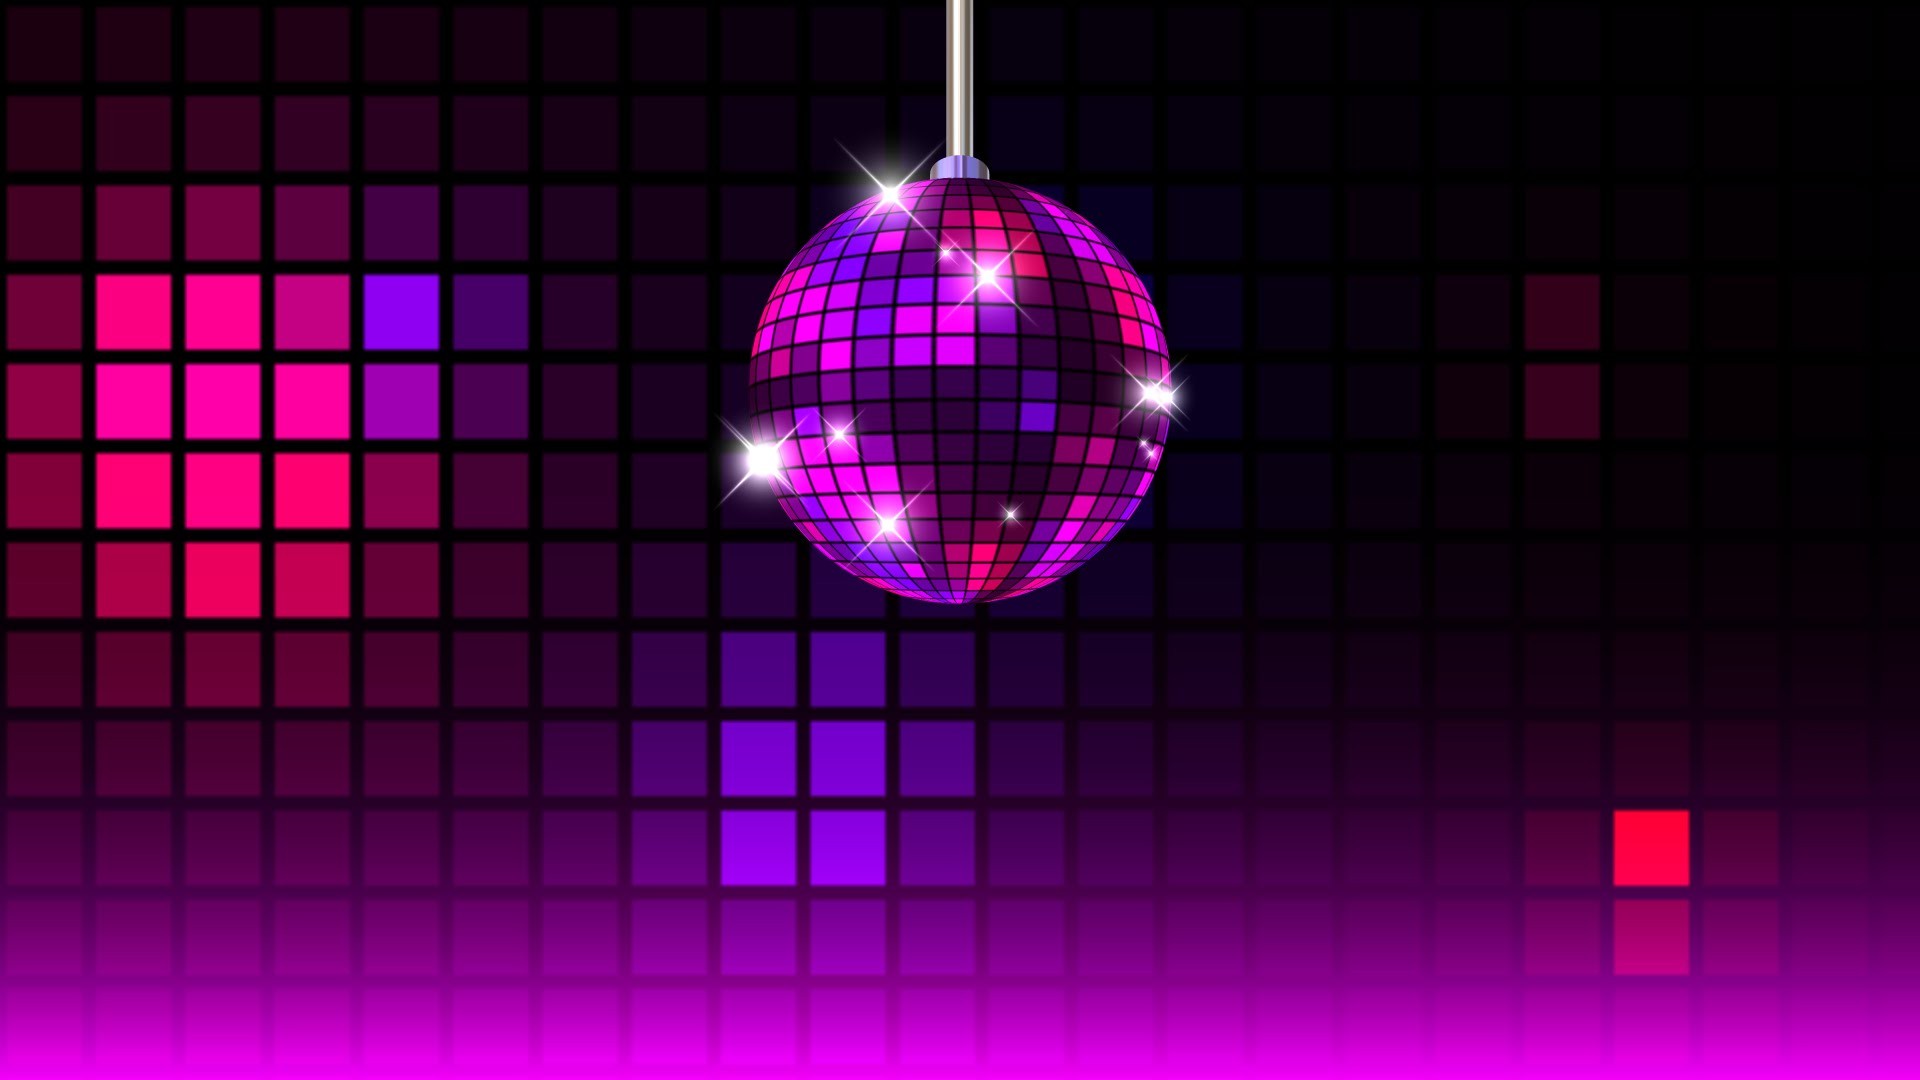 Disco Background Download Free Cool High Resolution HD Wallpapers Download Free Map Images Wallpaper [wallpaper376.blogspot.com]